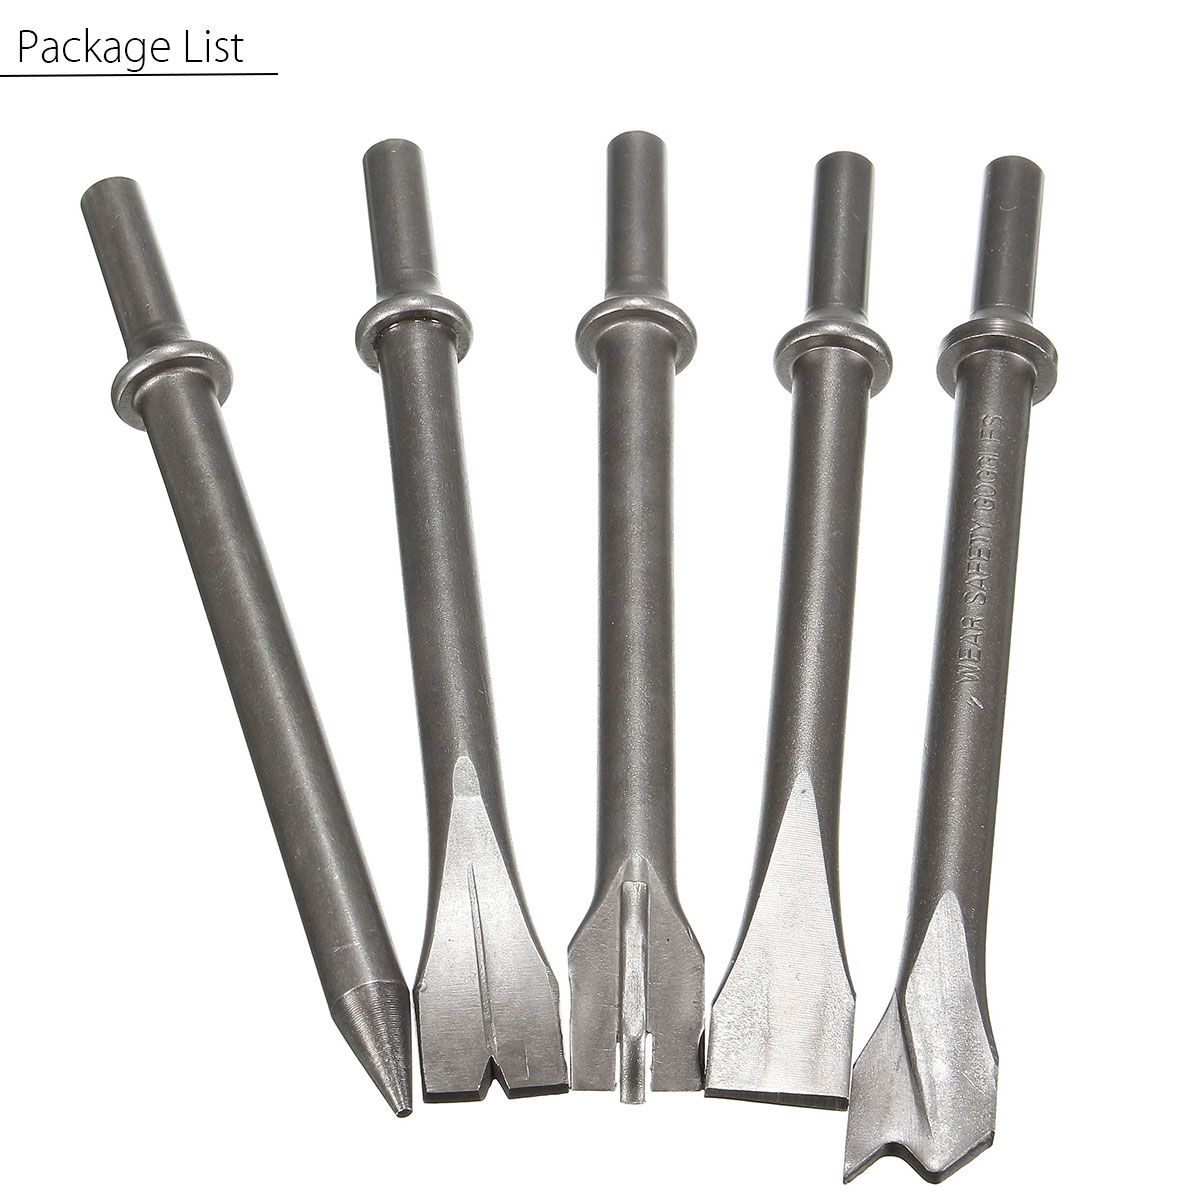 5Pcs-7-Inch-Extra-Long-10mm-Air-Hammer-Punch-Chipping-Chisel-Bit-Round-Bar-Set-Tools-Kit-1360170